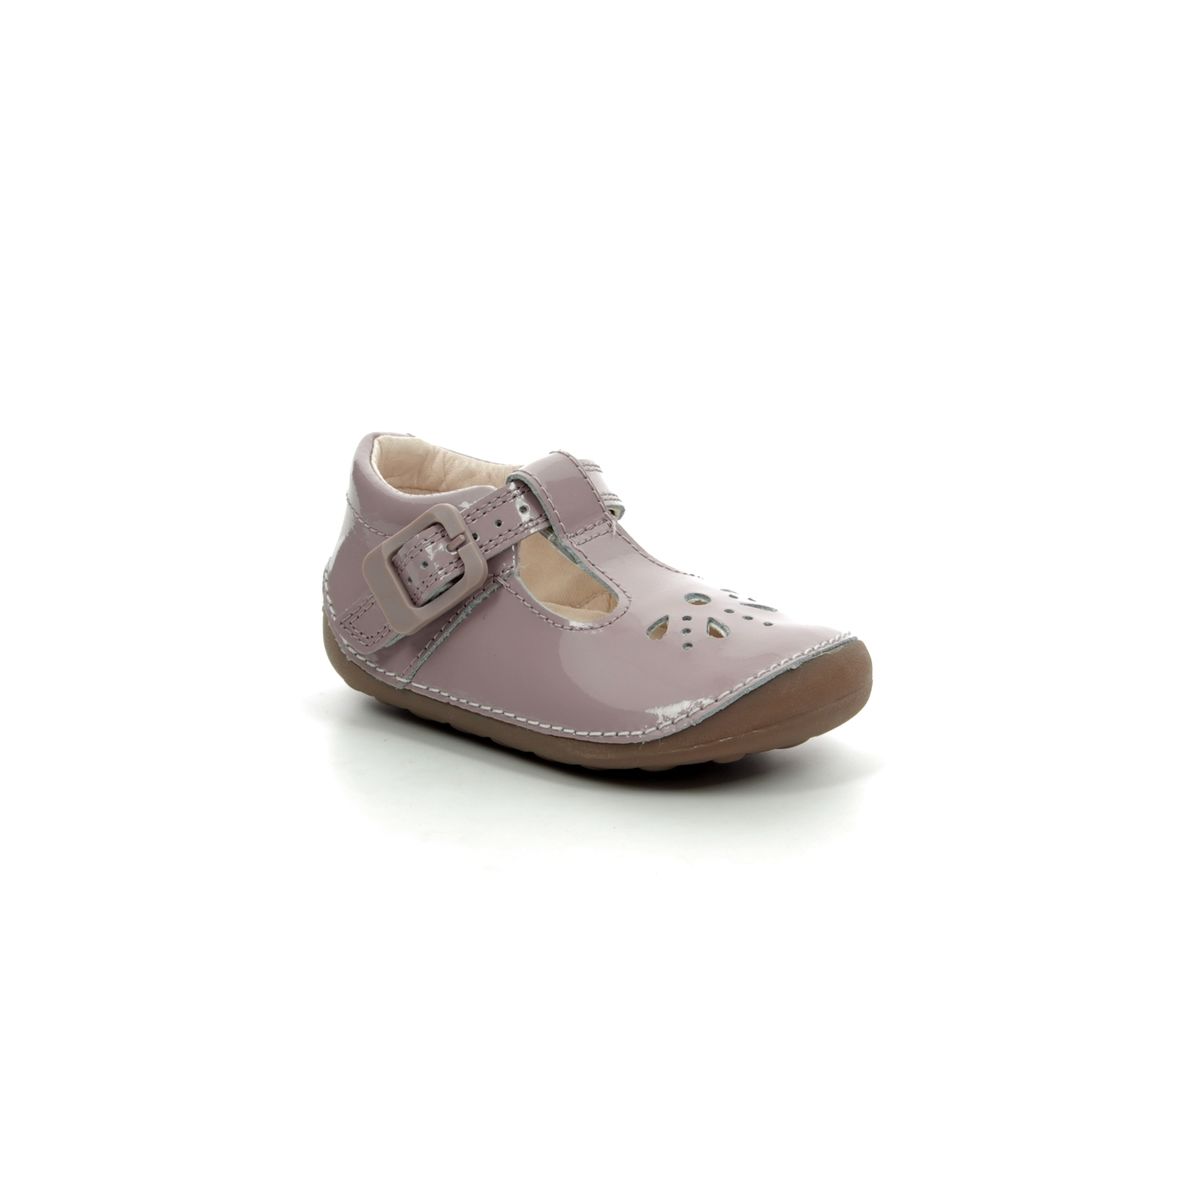 clarks first shoes